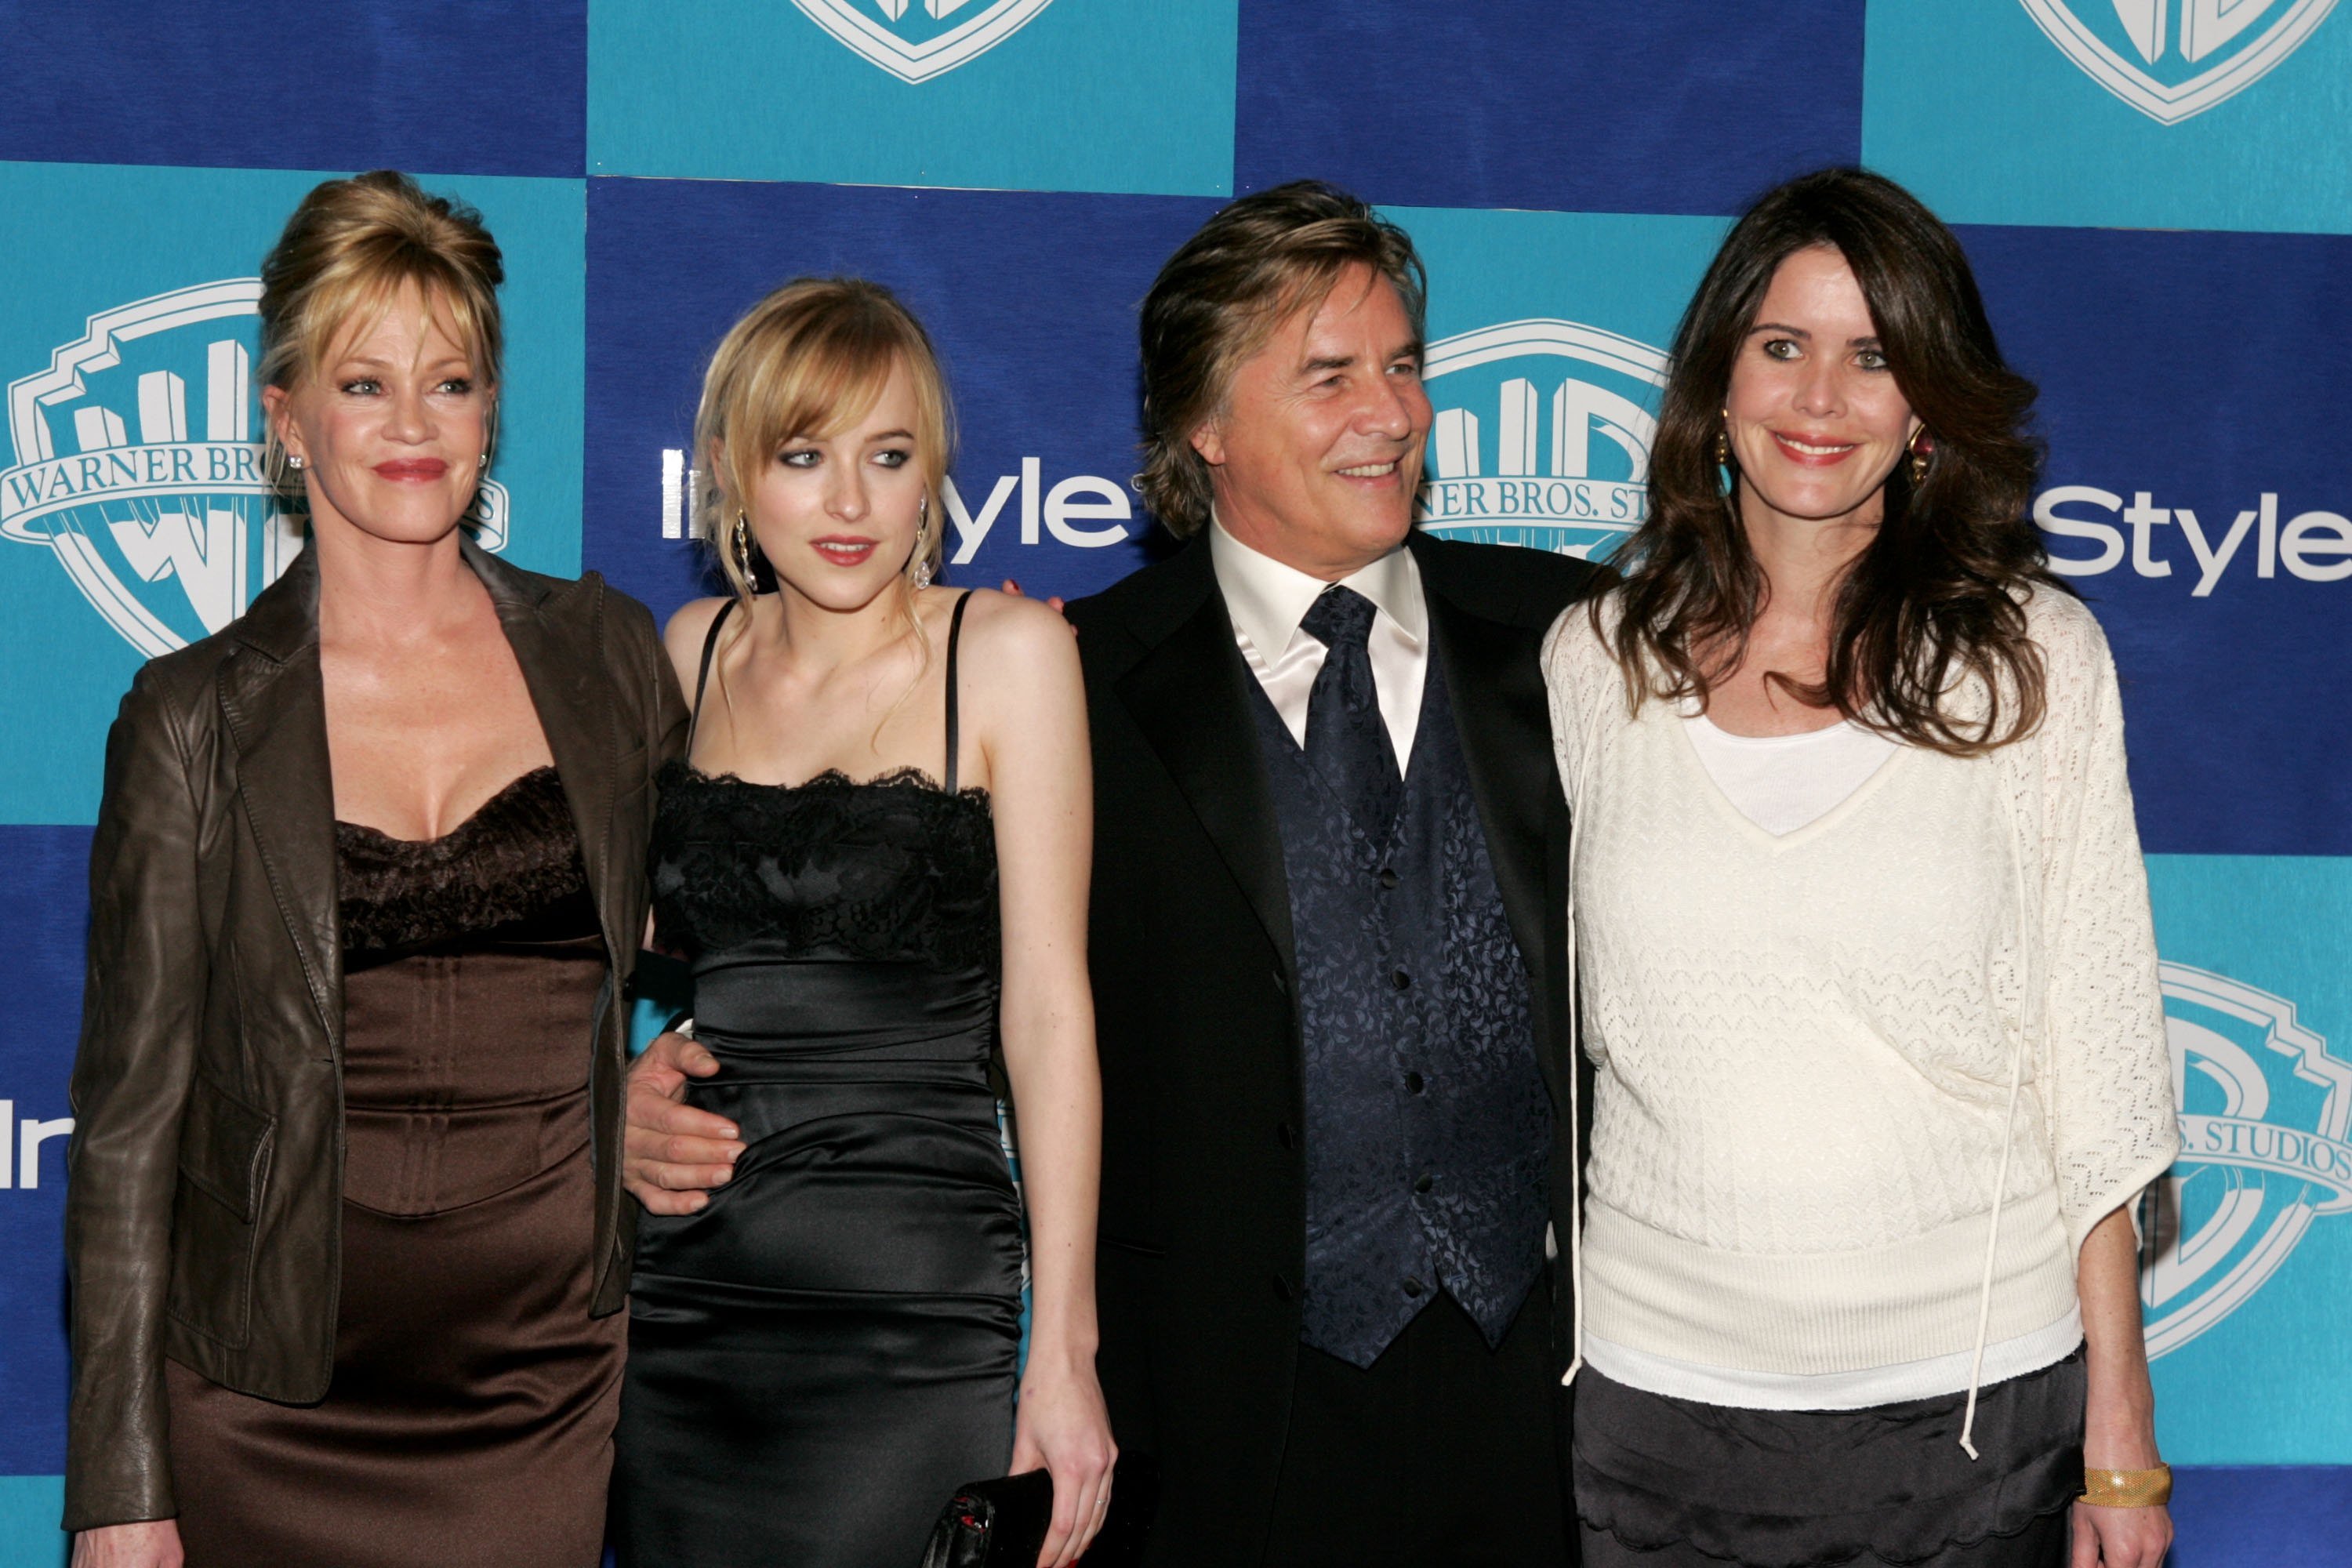 Melanie Griffith, Dakota Johnson, Don Johnson and Kelley Phleger at the Warner Bros./InStyle Golden Globe after-party held at the Oasis at the Beverly Hilton on January 16, 2006 in Beverly Hills, California | Source: Getty Images